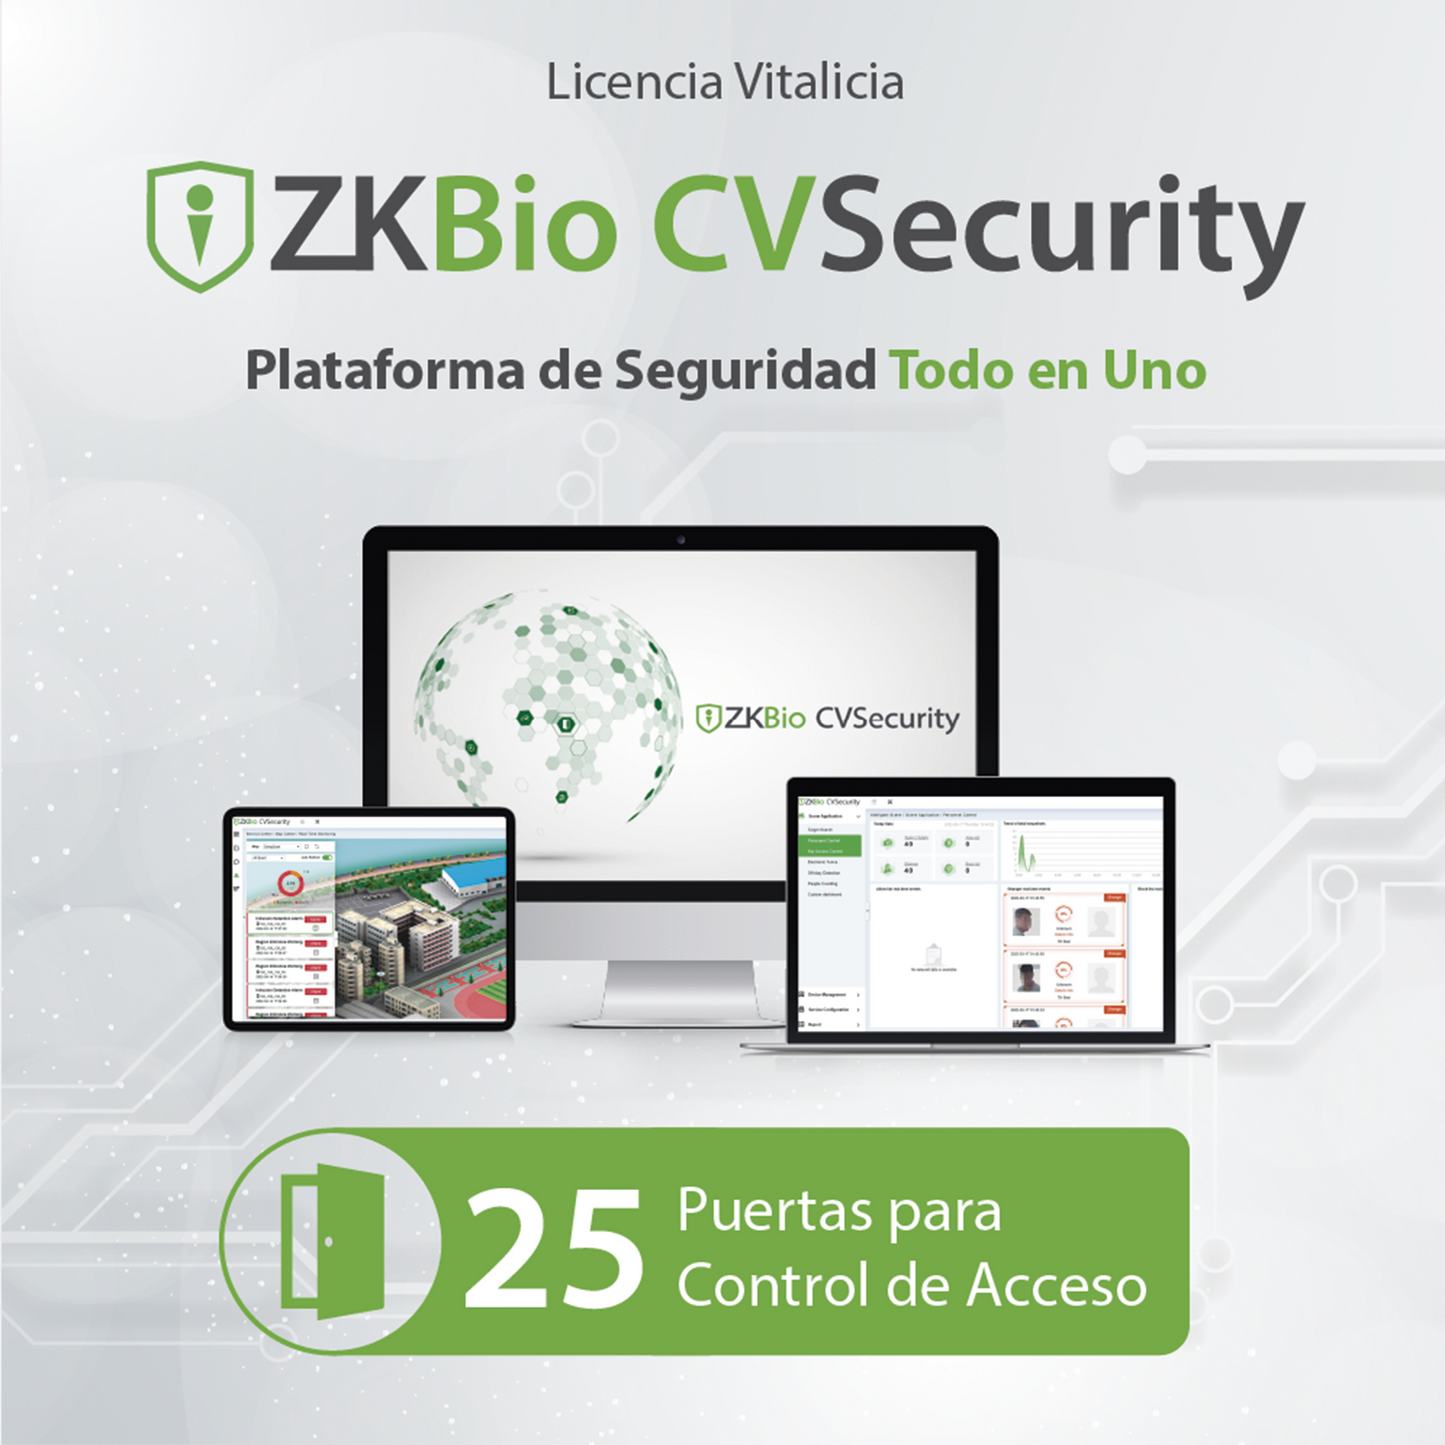 ZKBio CVsecurity License activates 25 doors for access control